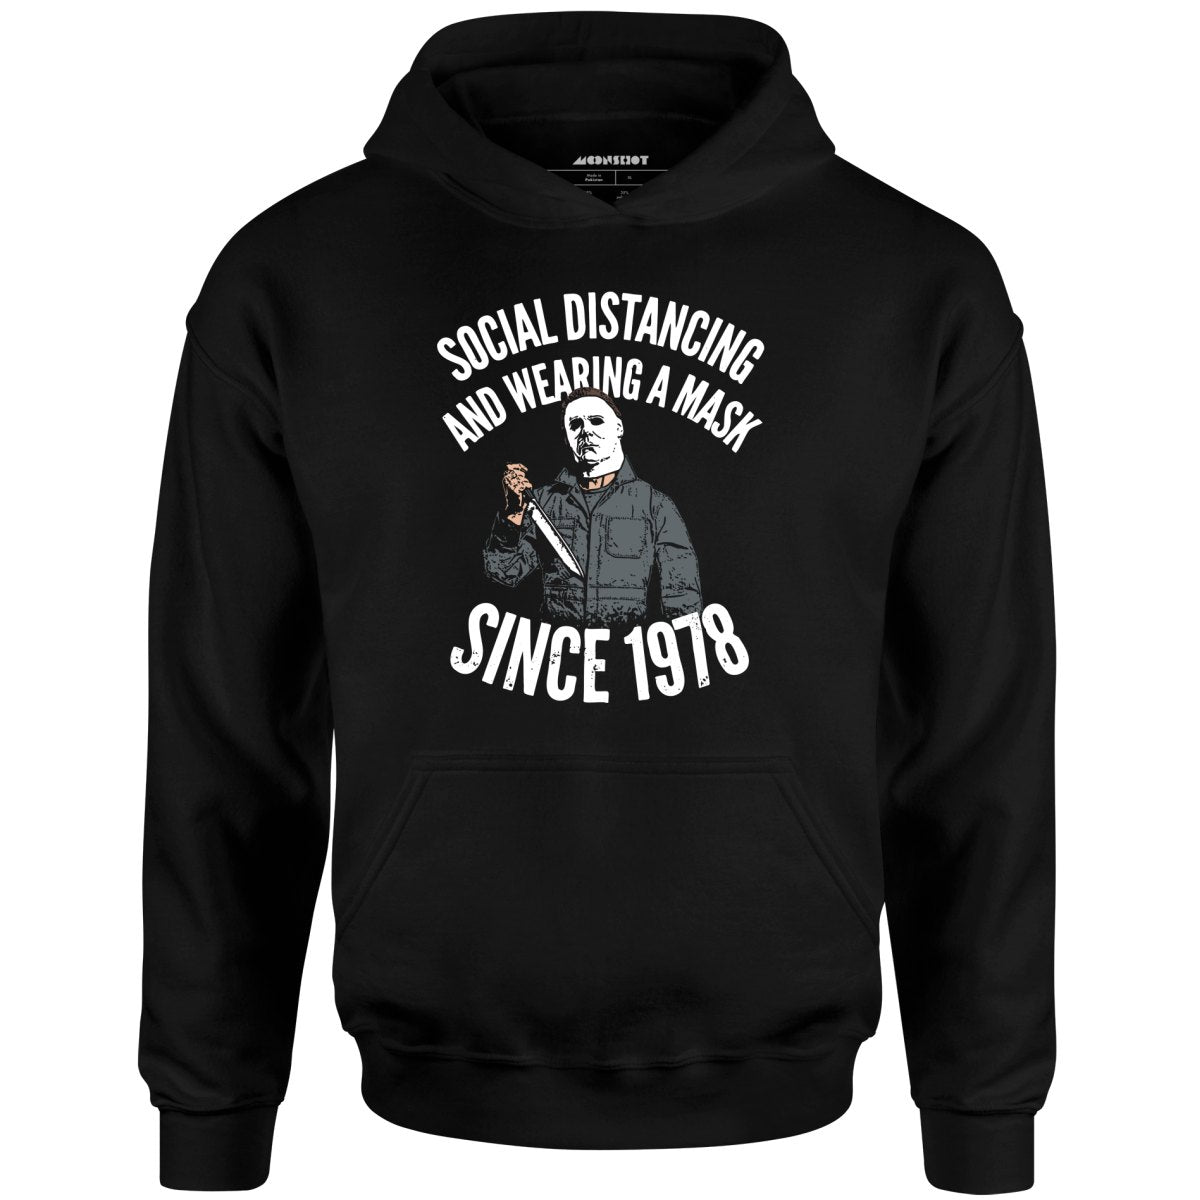 Social Distancing and Wearing a Mask Since 1978 - Unisex Hoodie